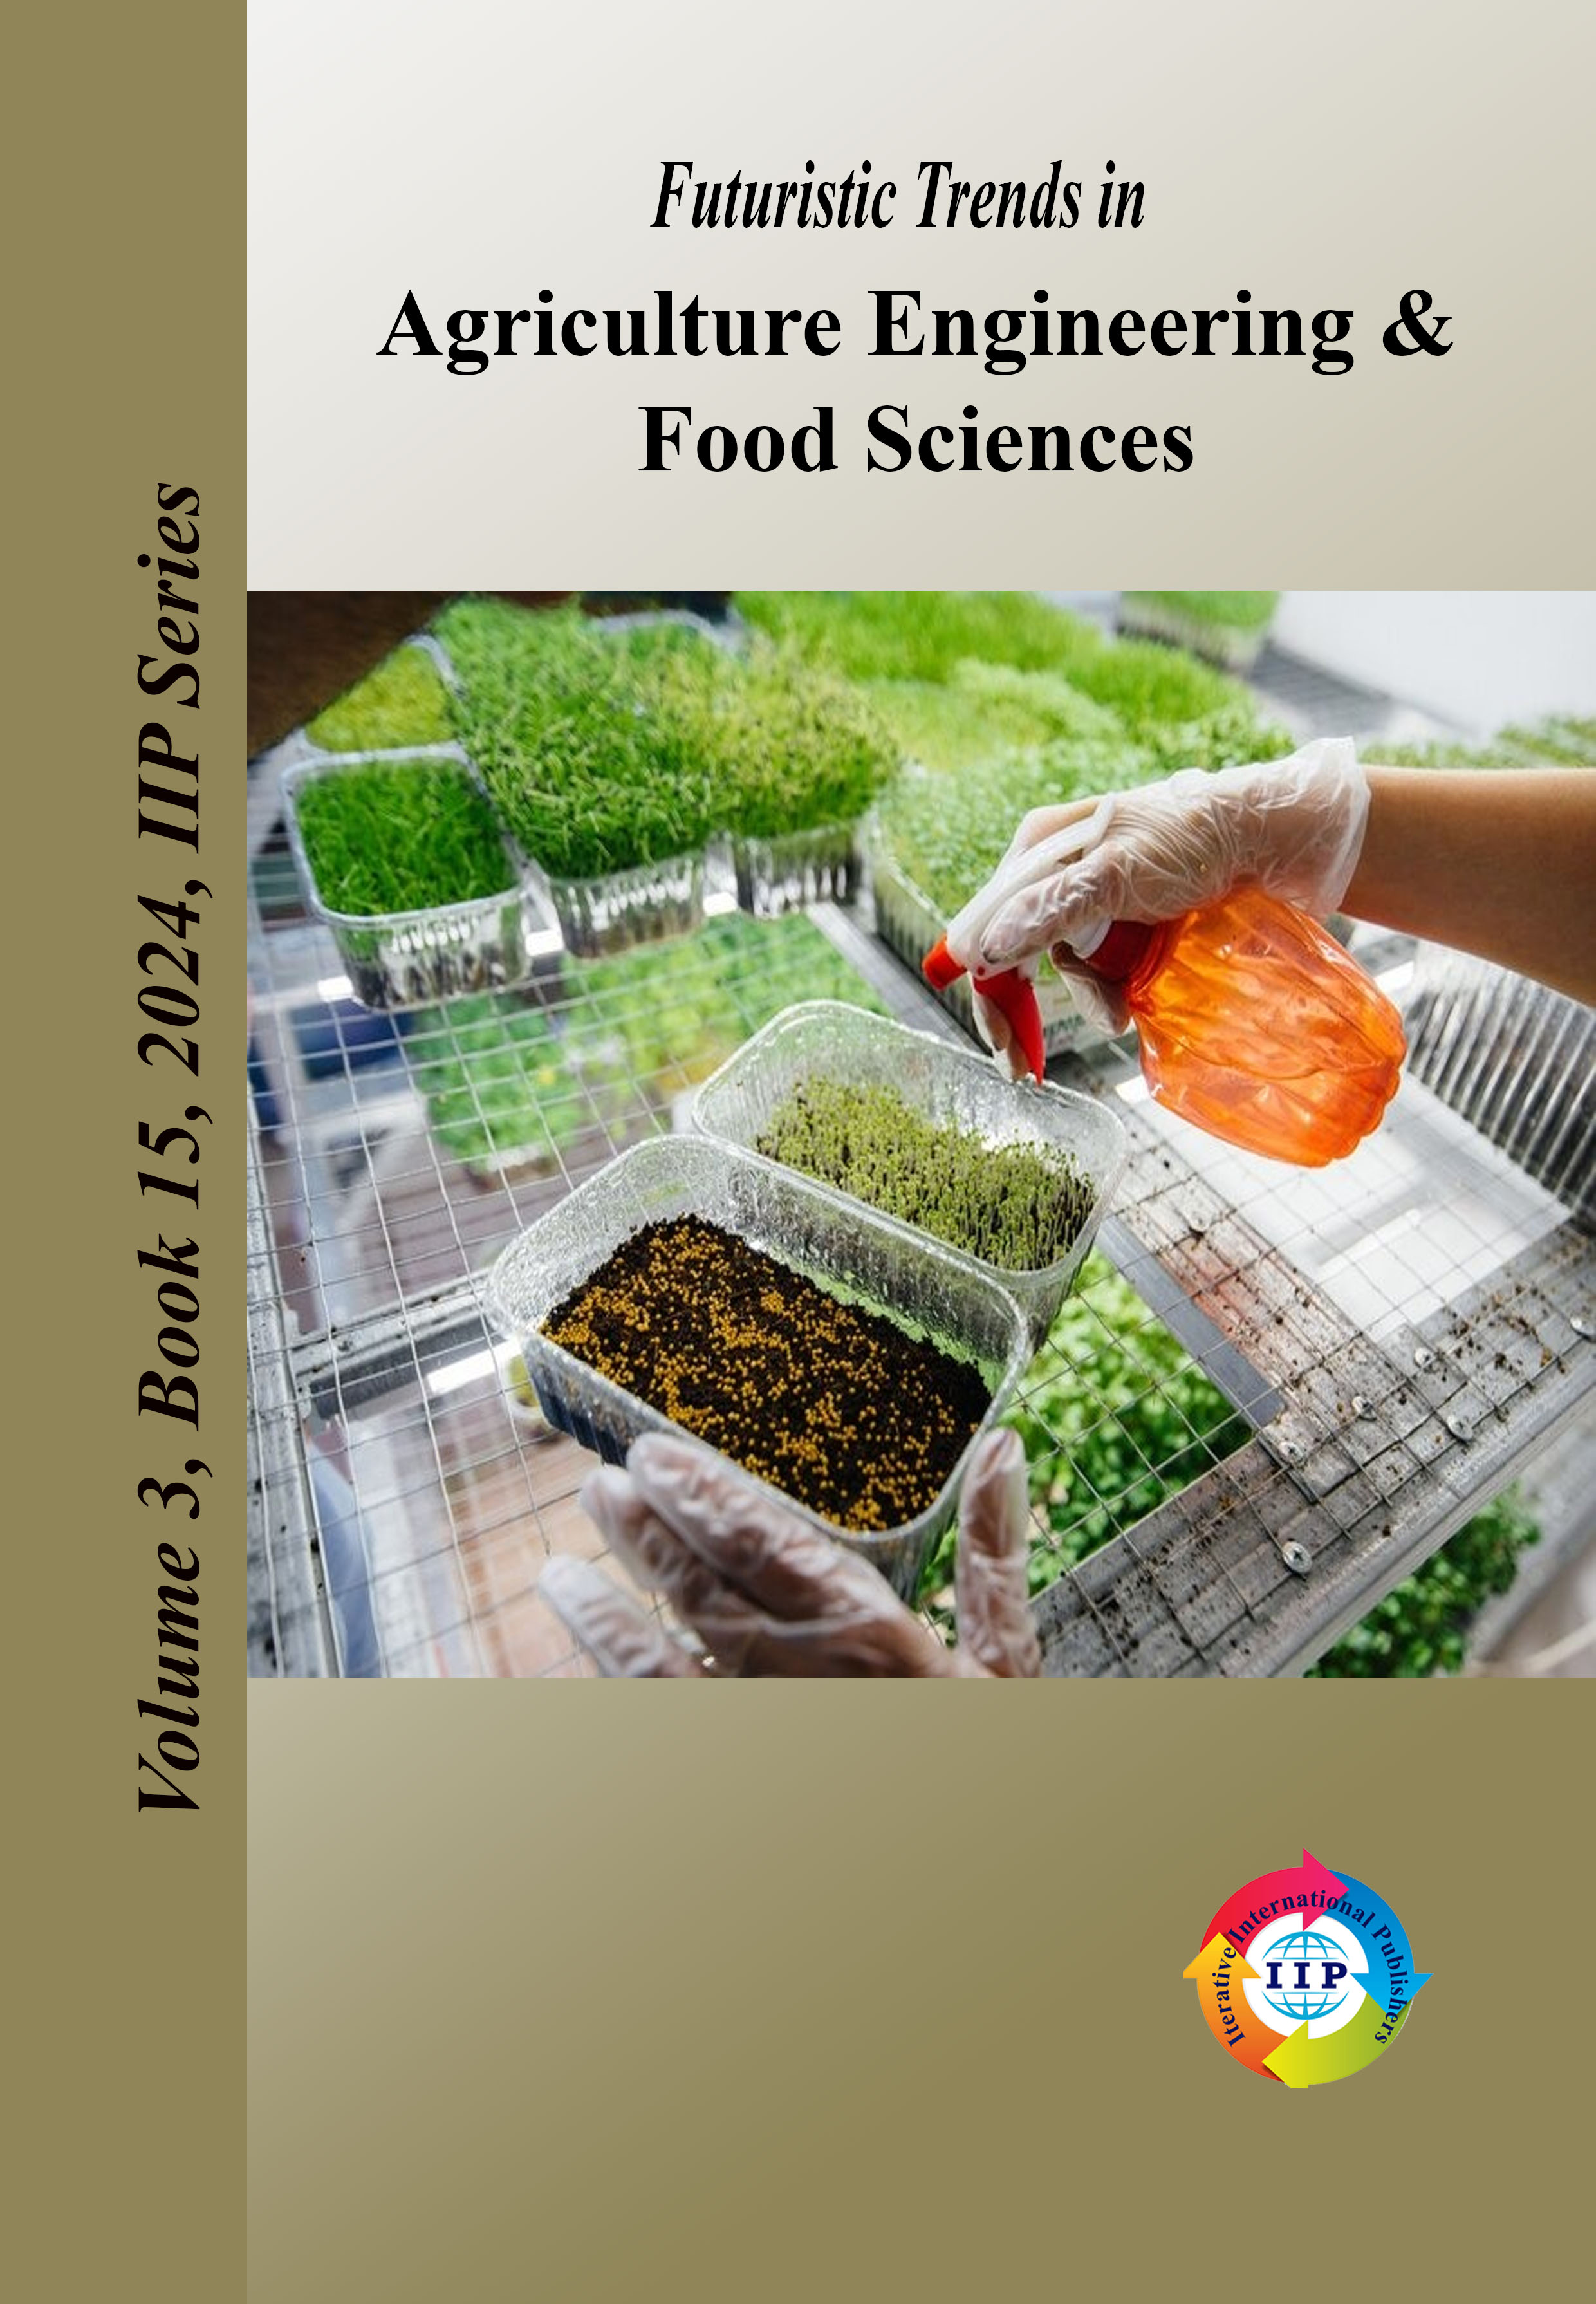 Futuristic Trends in Agriculture Engineering & Food Sciences Volume 3 Book 15